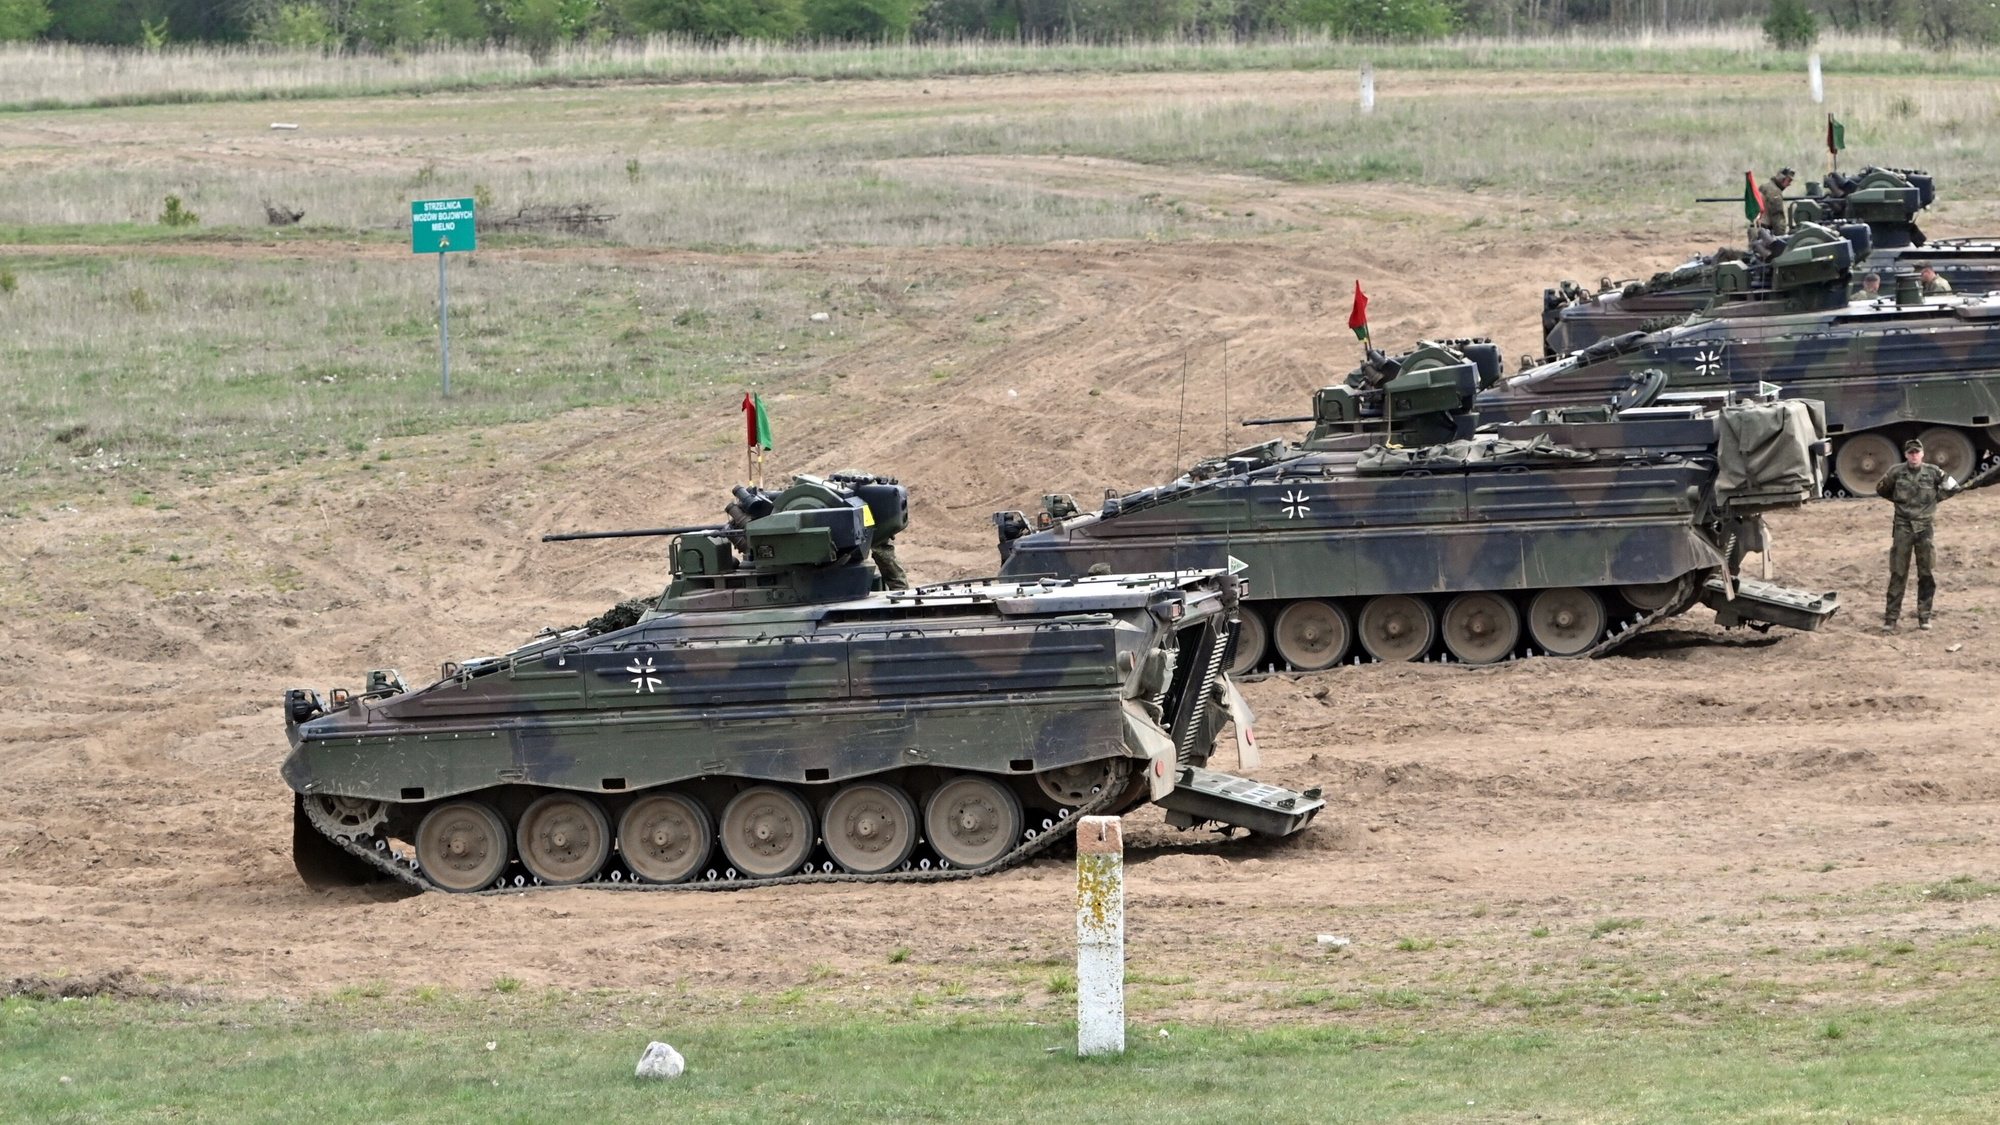 epa09930098 German Marder infantry fighting vehicles in action during in the Defender Europe 2022 military exercise at the Drawsko Pomorskie military range in Drawsko Pomorskie, Poland, 06 May 2022. Poland is among nine countries hosting the Defender Europe 2022 (DE22) and Swift Response 2022 (SR22), large-scale US Army-led, multinational, joint military exercises held from 01 May to 27 May. A total of 18,000 troops from over 20 countries will take part in the drills, including about 7,000 on the territory of Poland.  EPA/Marcin Bielecki POLAND OUT